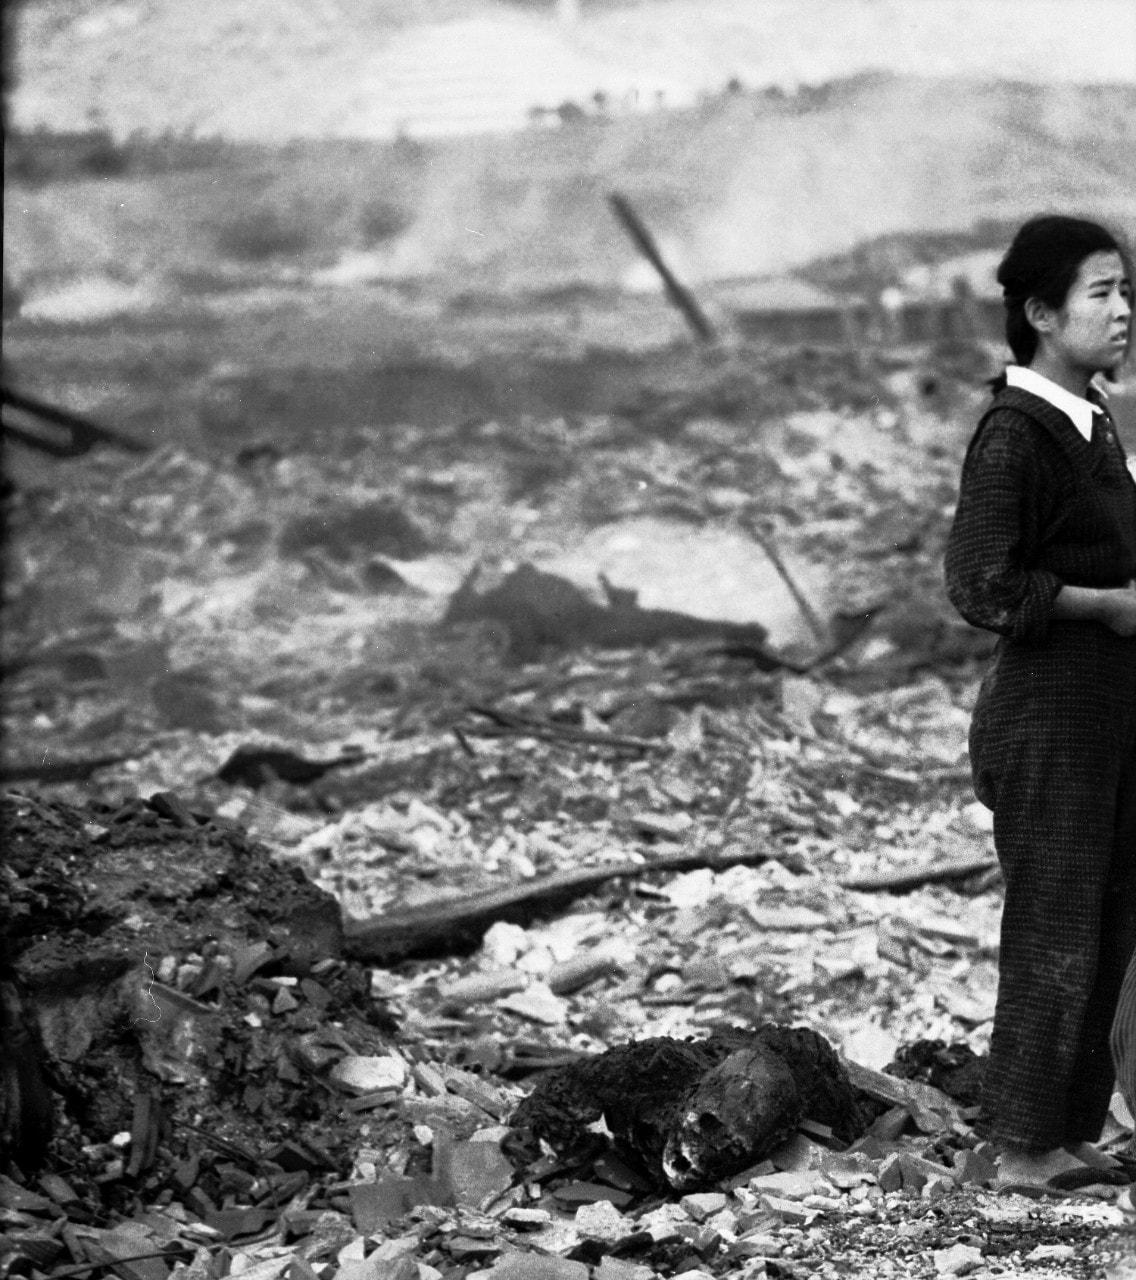 a photo of Nagasaki a day after the atom bomb